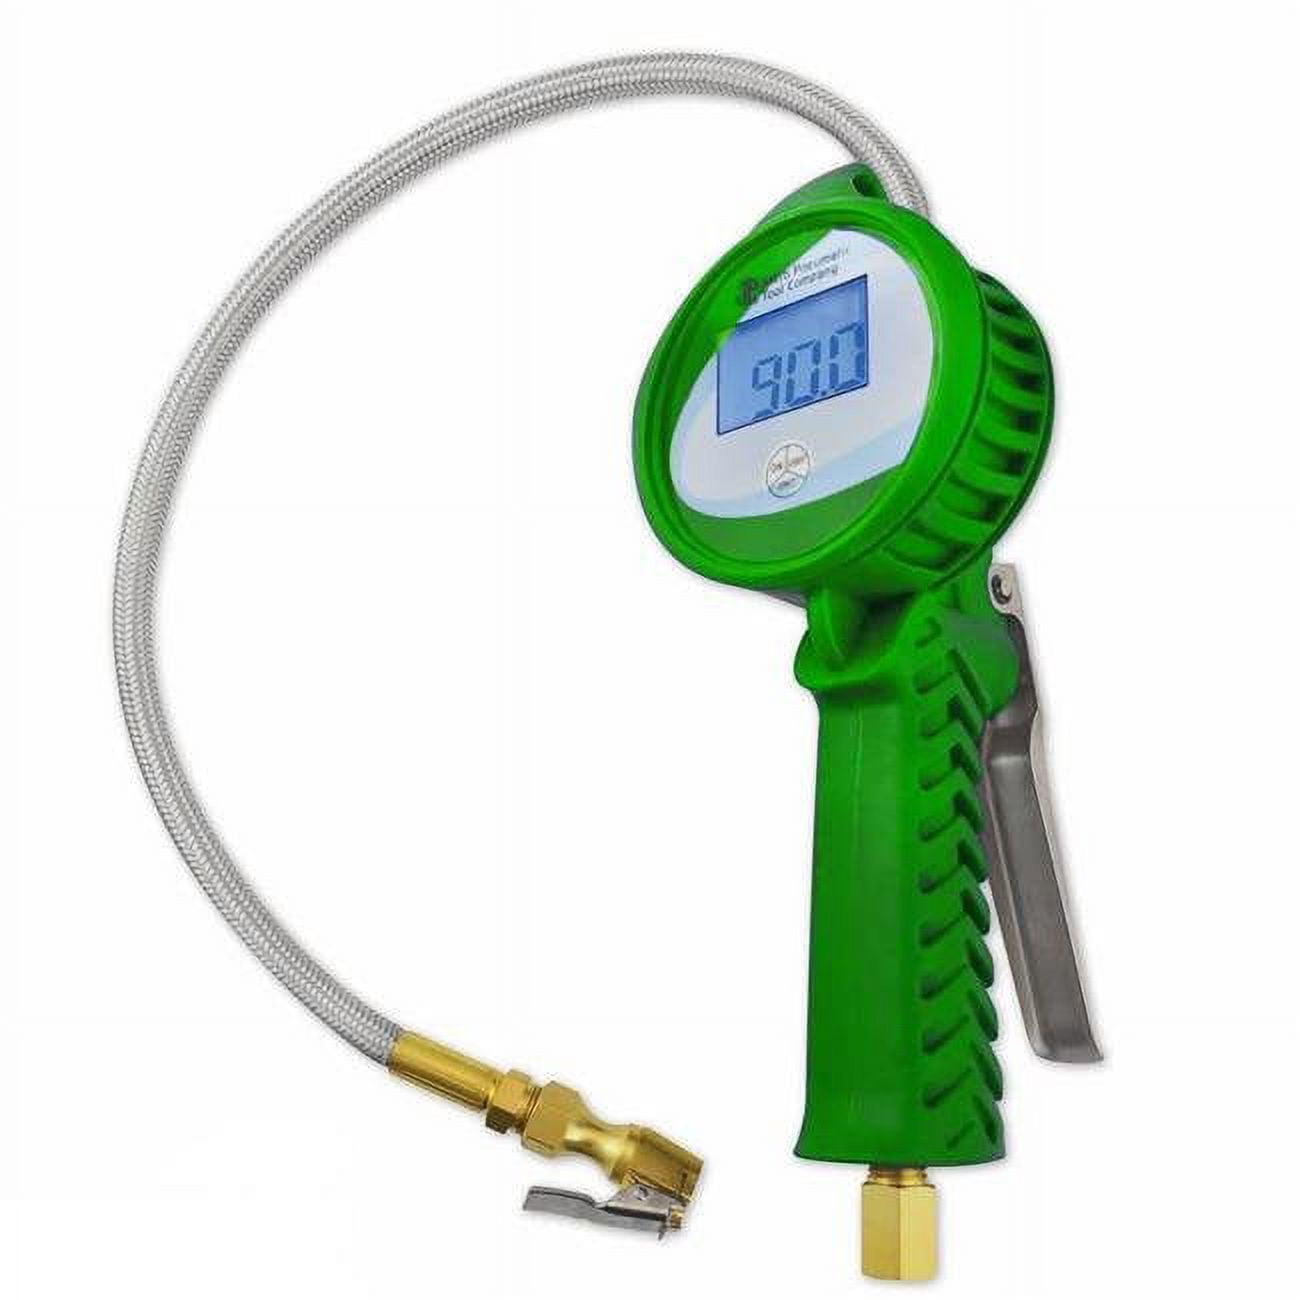 Astro Pneumatic Tool 3.5 in. Digital Tire Inflator with Hose, Green